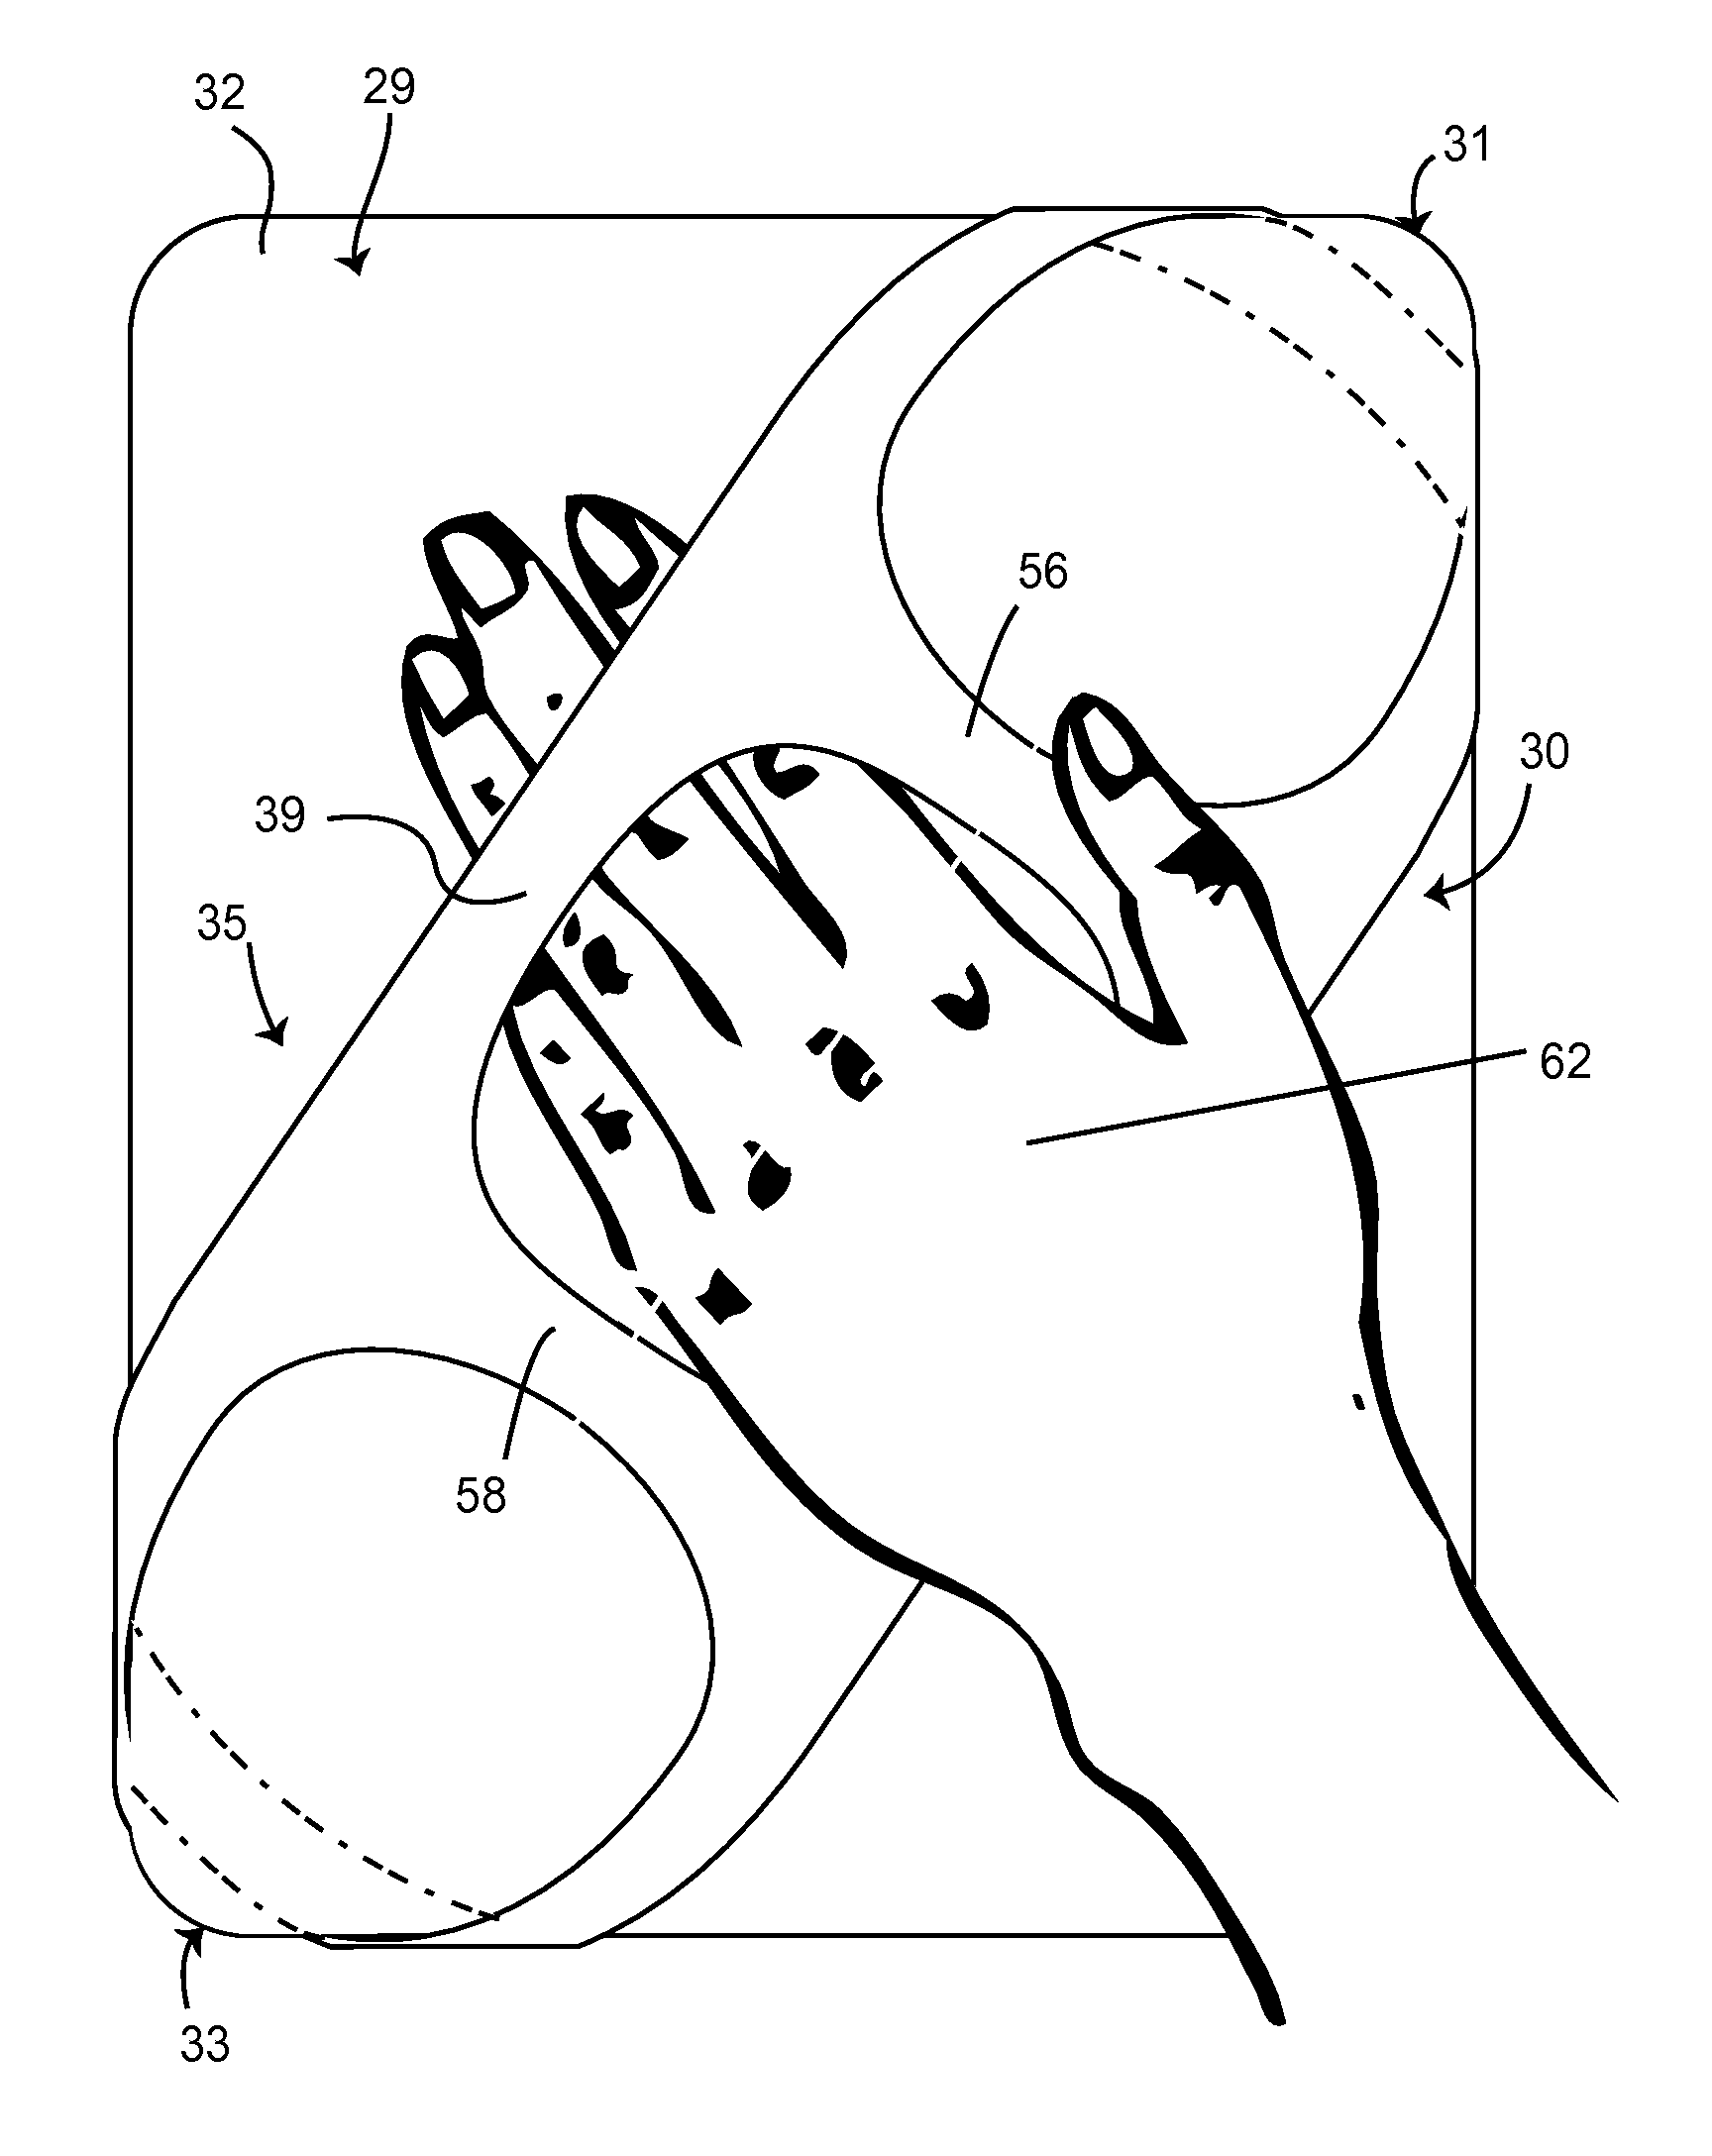 One-handed, back-based support for a hand-held object